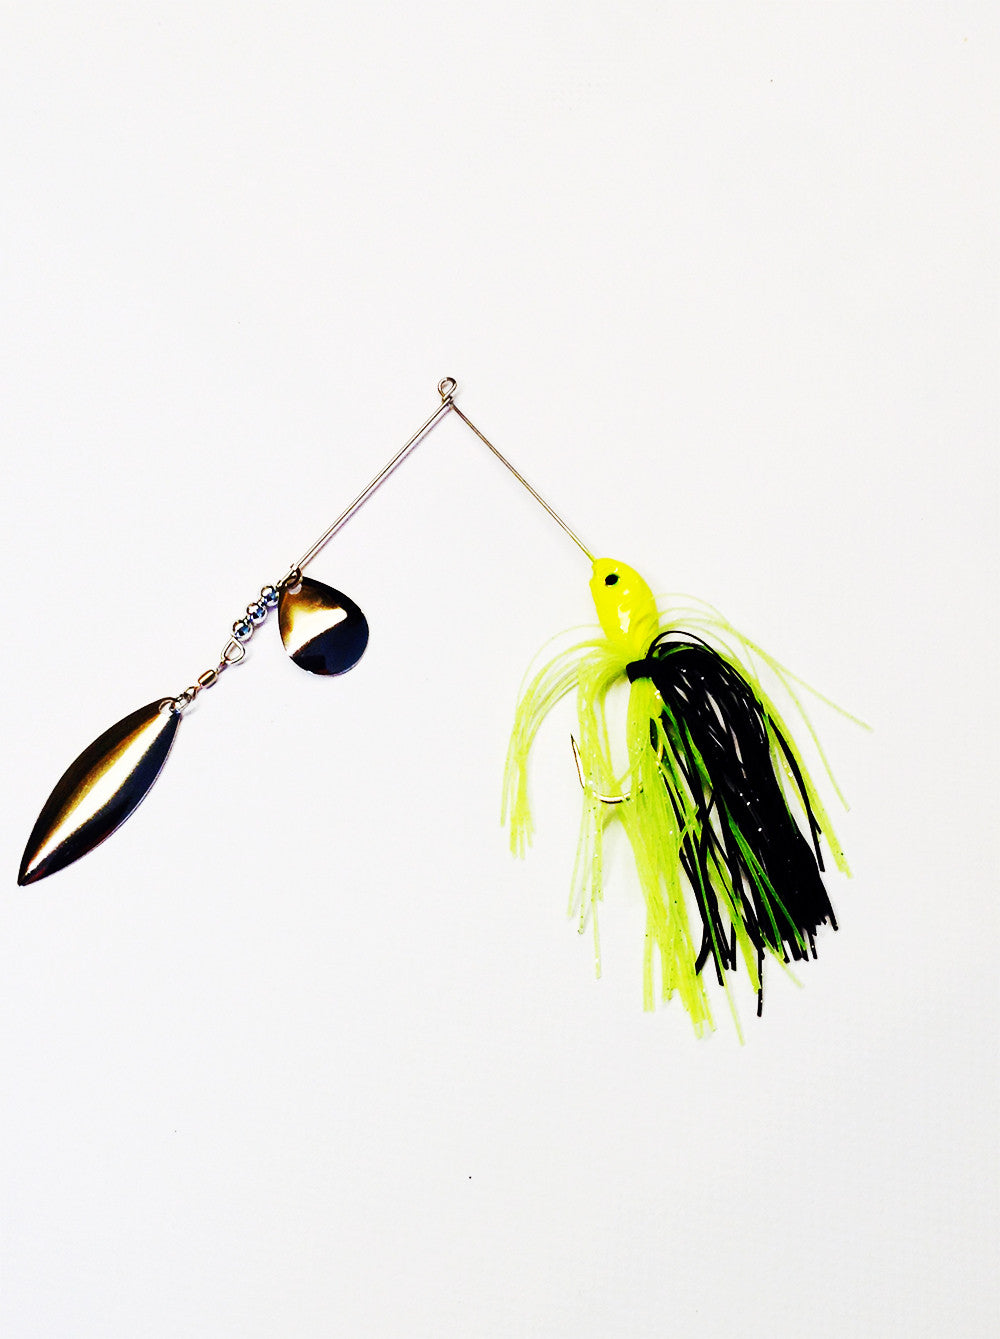 Spinnerbait Fishing Lure Hard Metal Jig Spinner Baits Kits Swimbait for Bass  Trout Pike Salmon Walleye Freshwater Saltwater 5pcs/Pack 5 Pack (3/8oz)